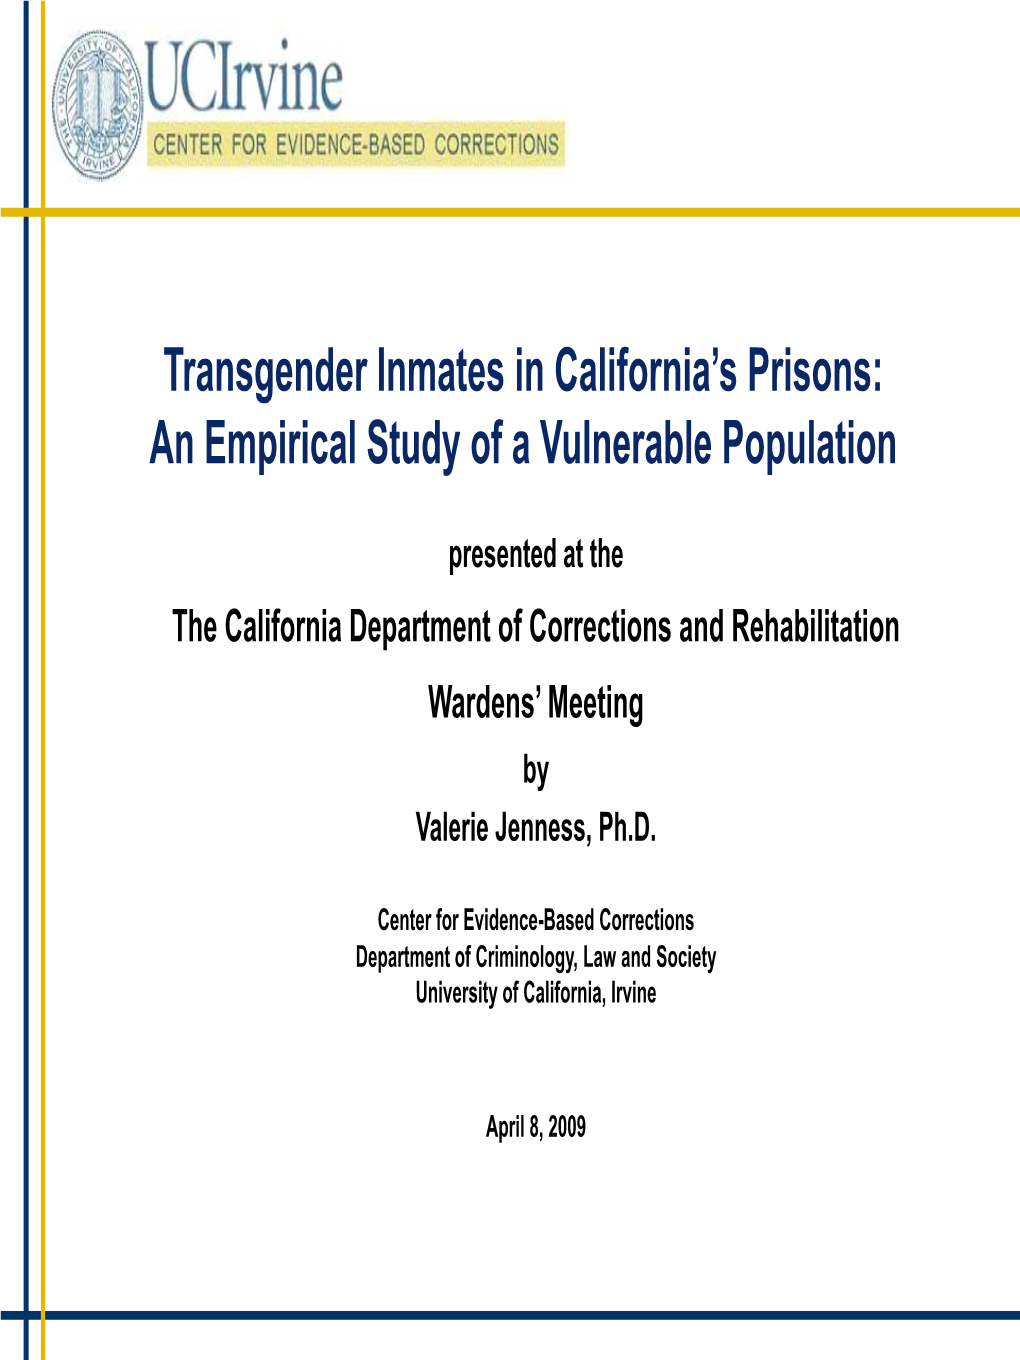 Transgender Inmates in California's Prisons: an Empirical Study